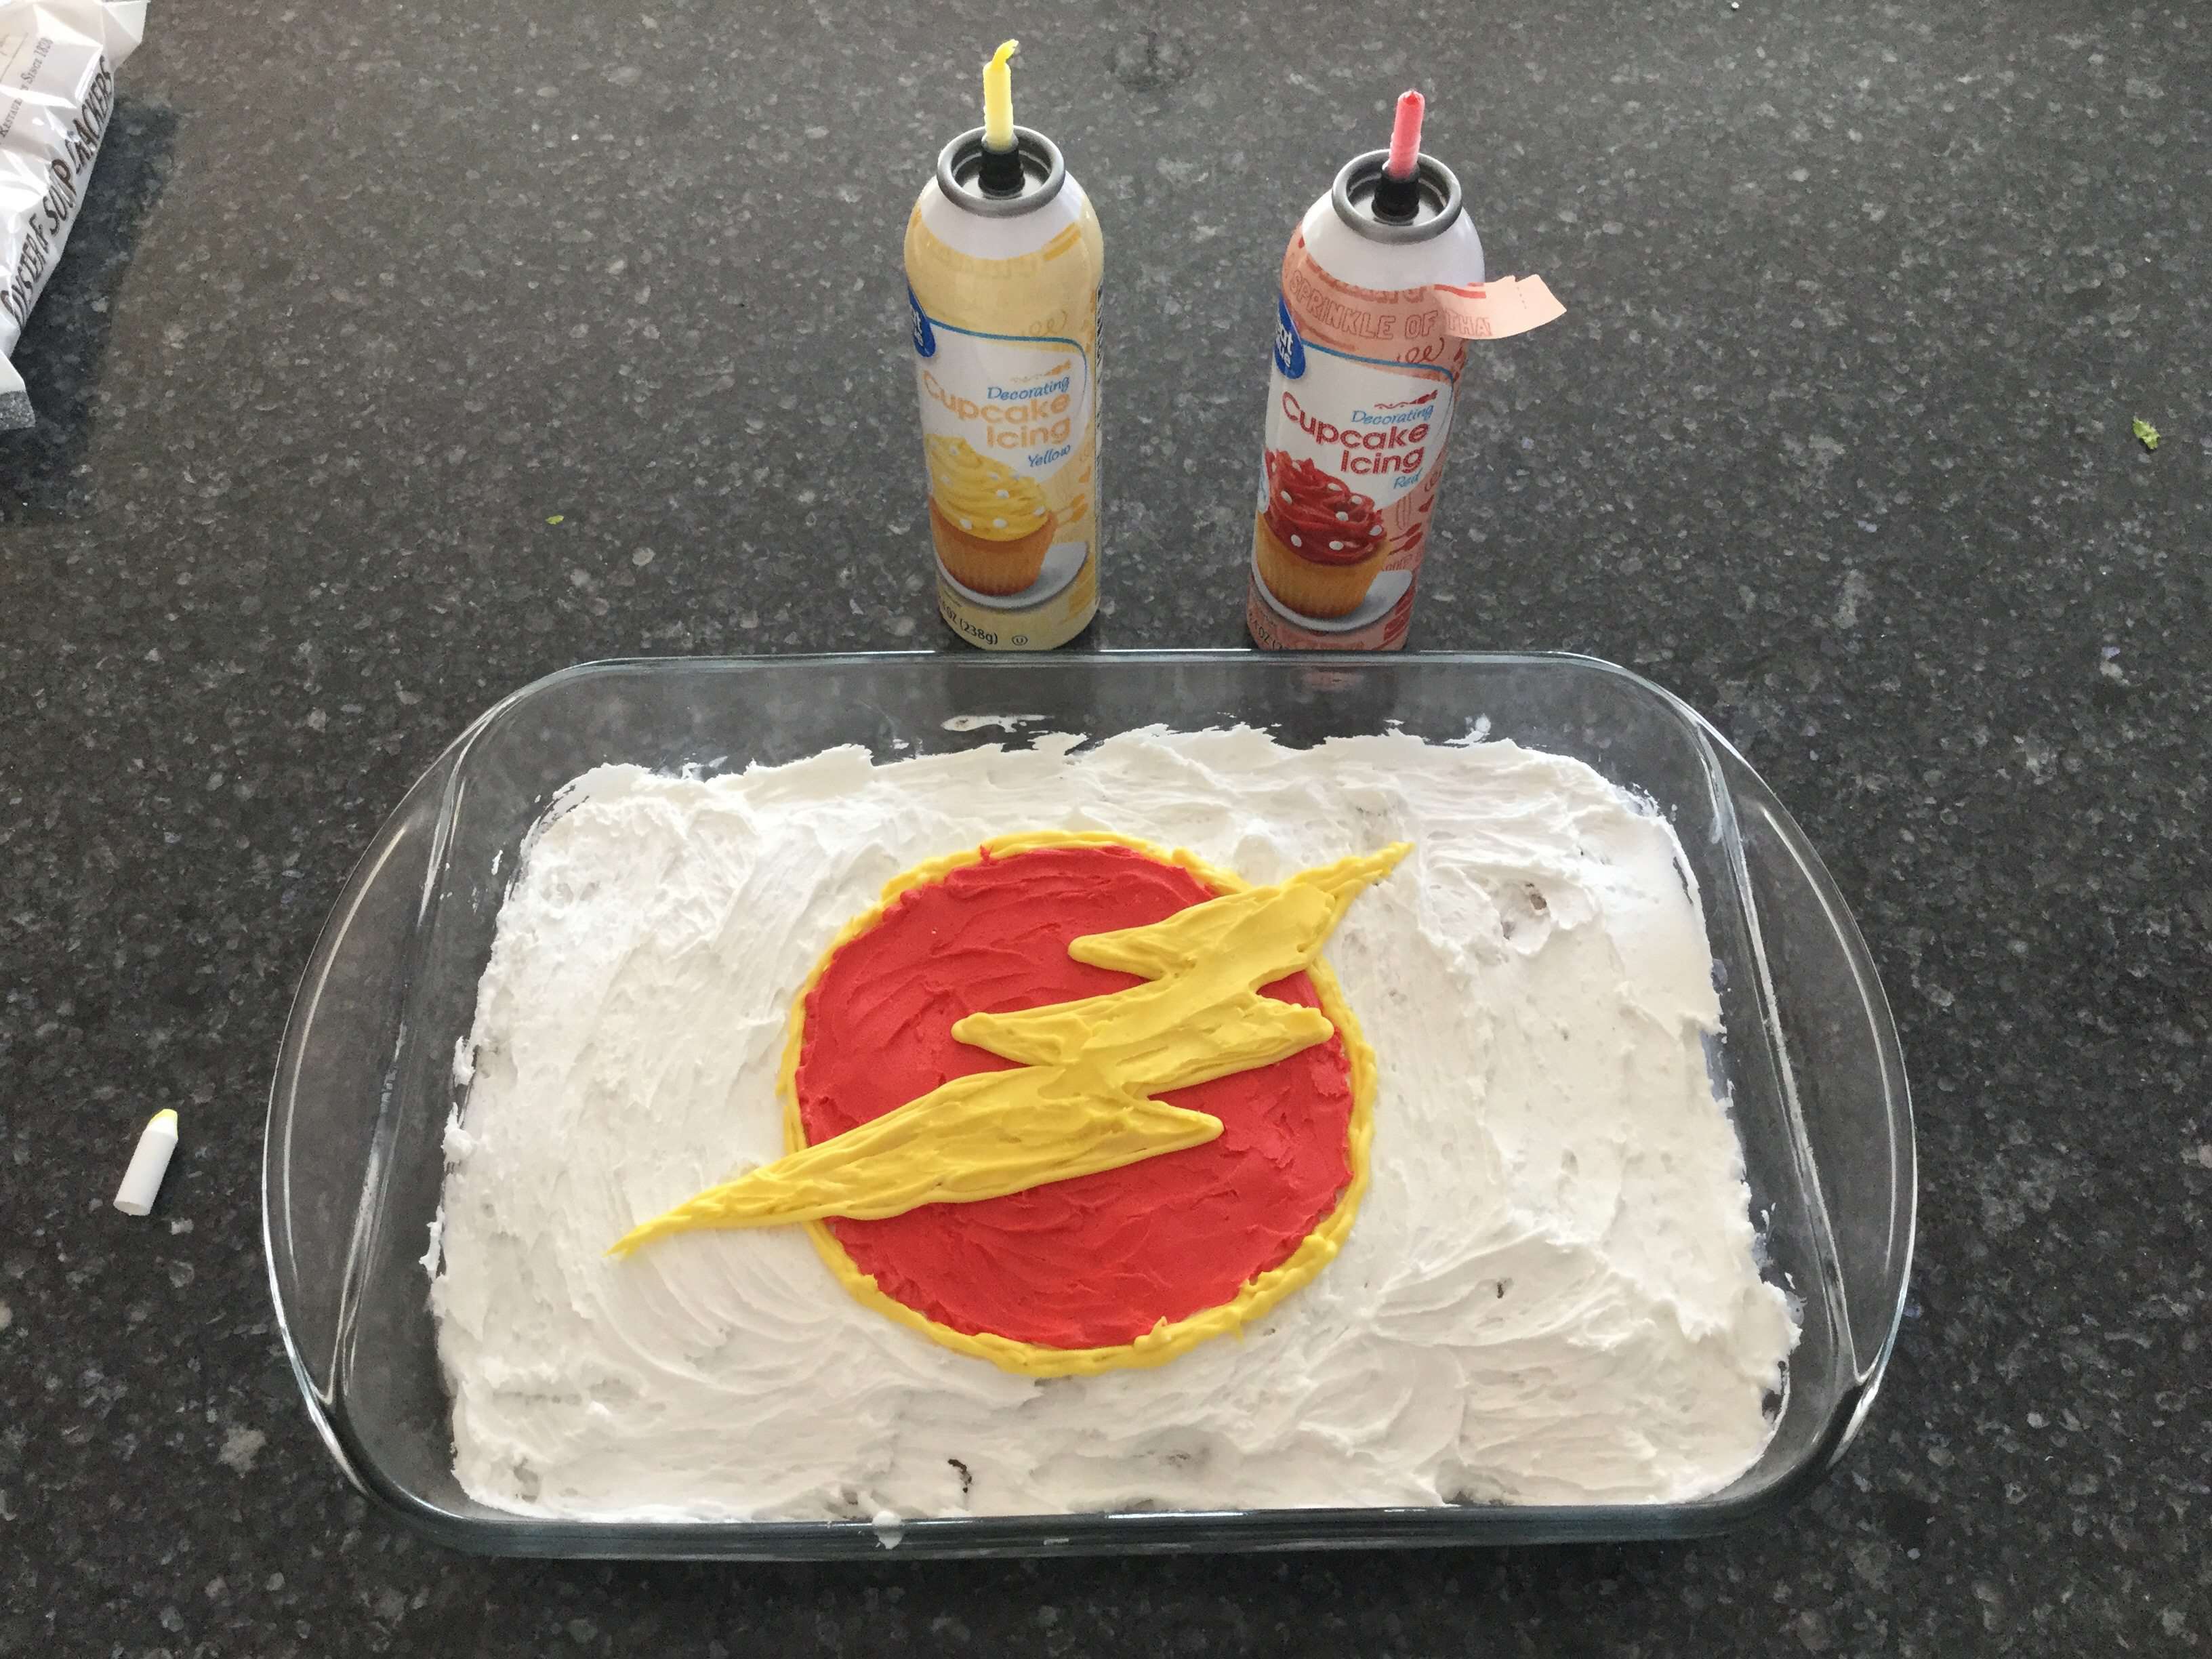 Decorating - you have so many options - you can decorate with syrup, fruit, nuts, sprinkles, etc.  My son is a huge fan of the TV show "The Flash".  I decorated using the spray frosting cans to make a Flash emblem, added sprinkles, and a boarder.